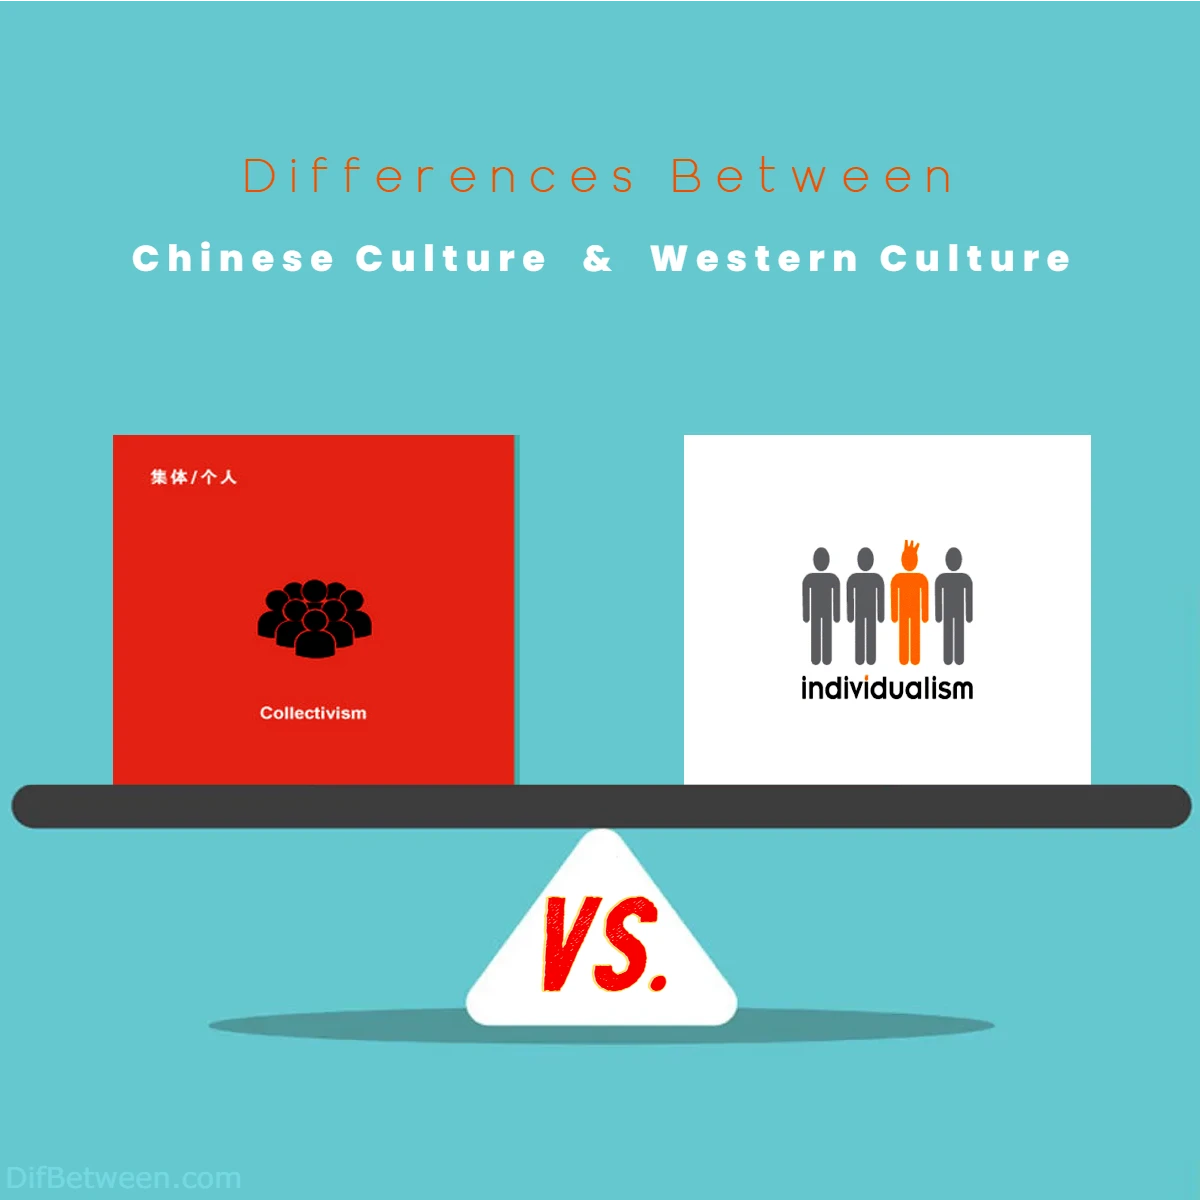 Differences Between Chinese Culture vs Western Culture